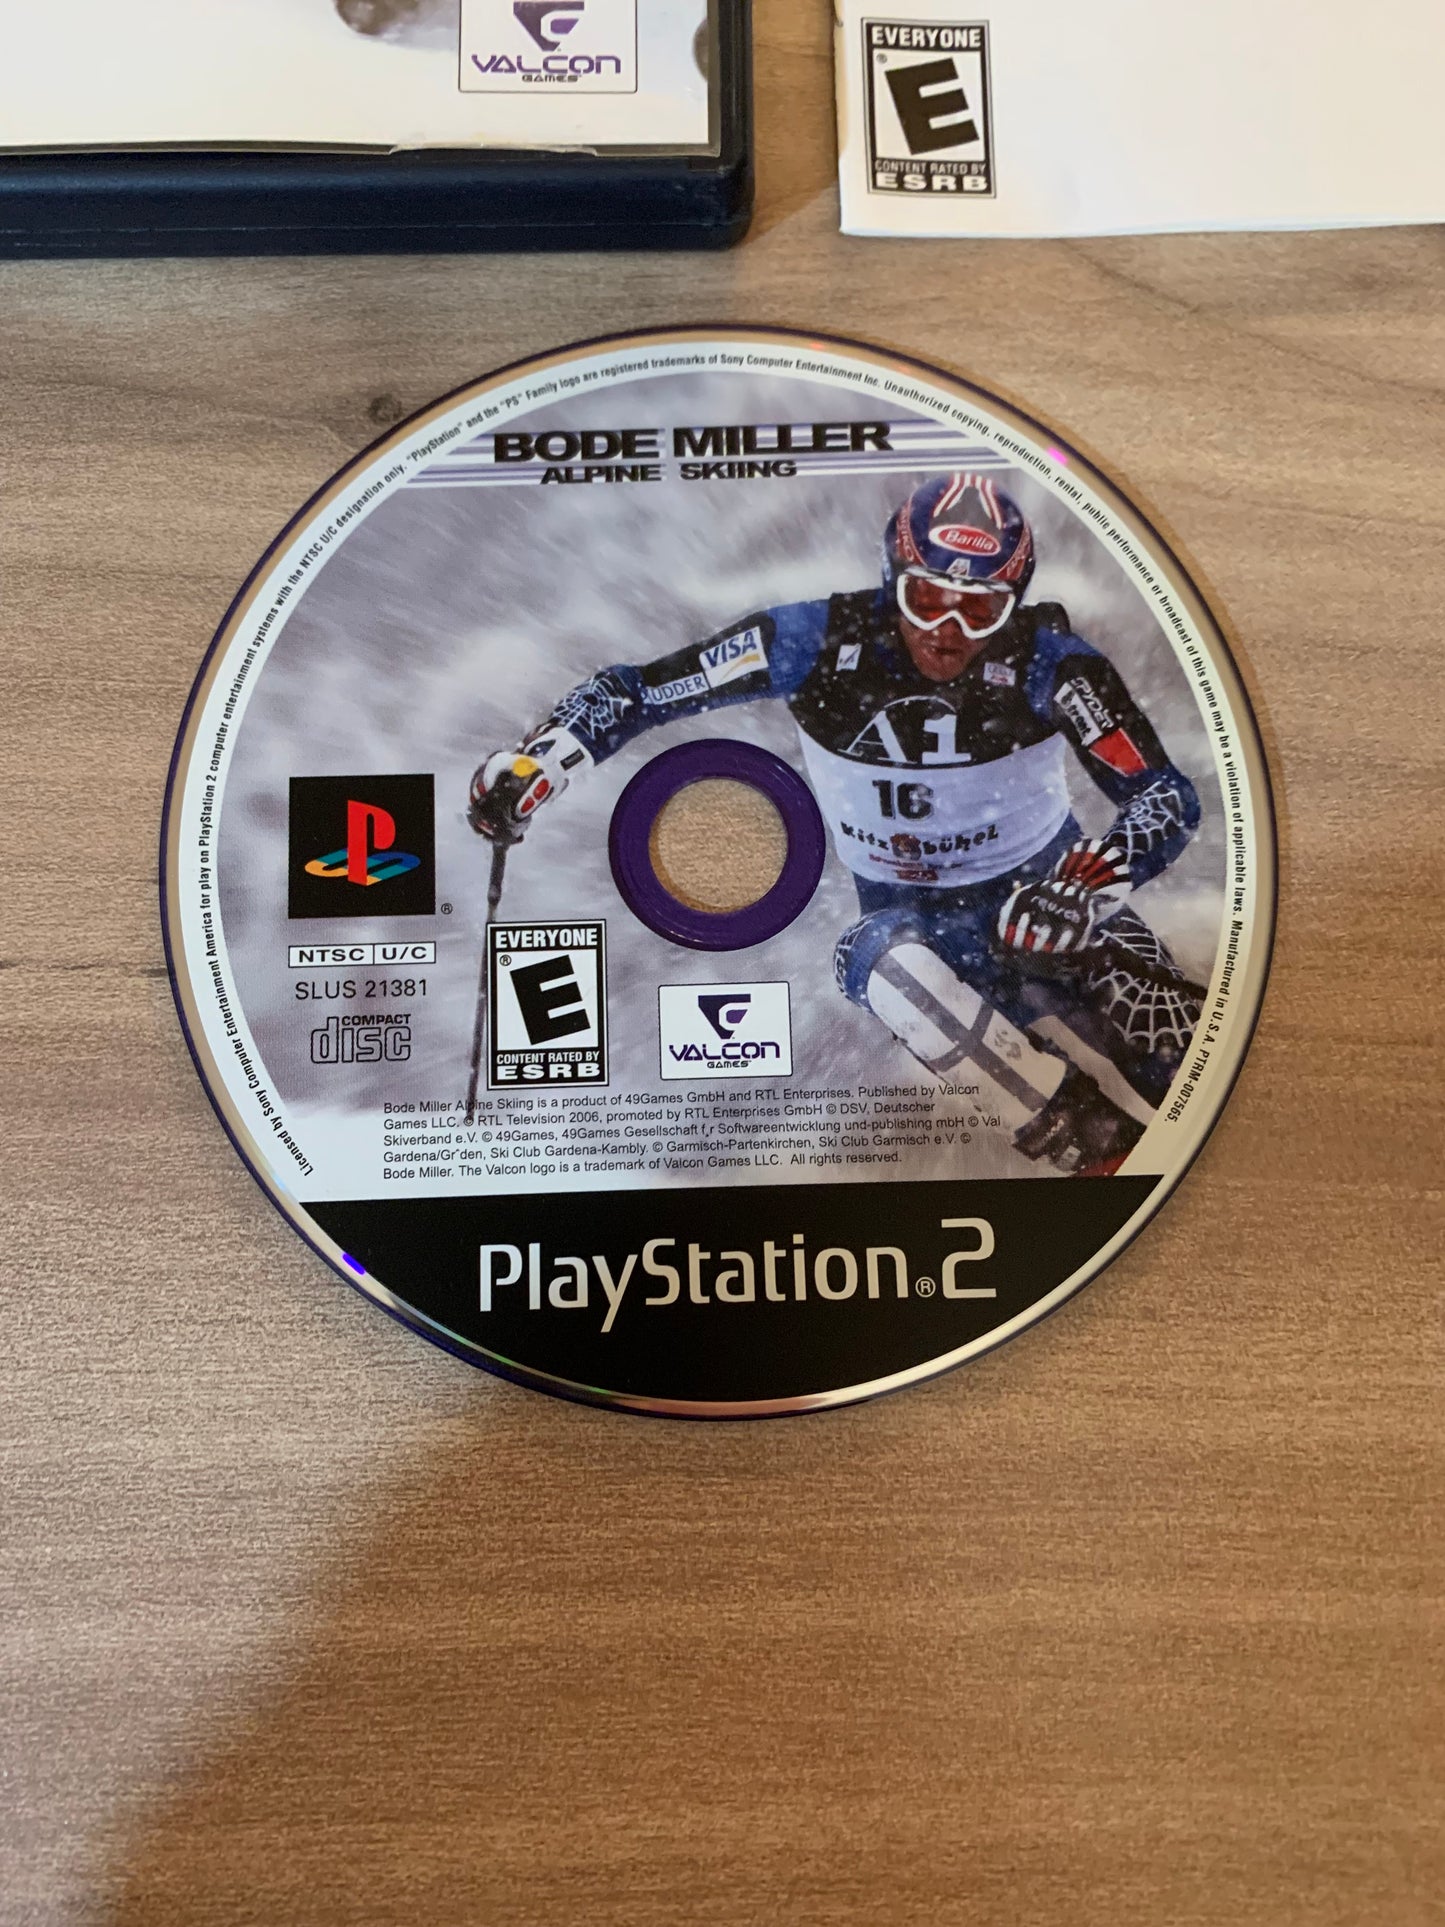 SONY PLAYSTATiON 2 [PS2] | BODE MiLLER ALPiNE SKiiNG